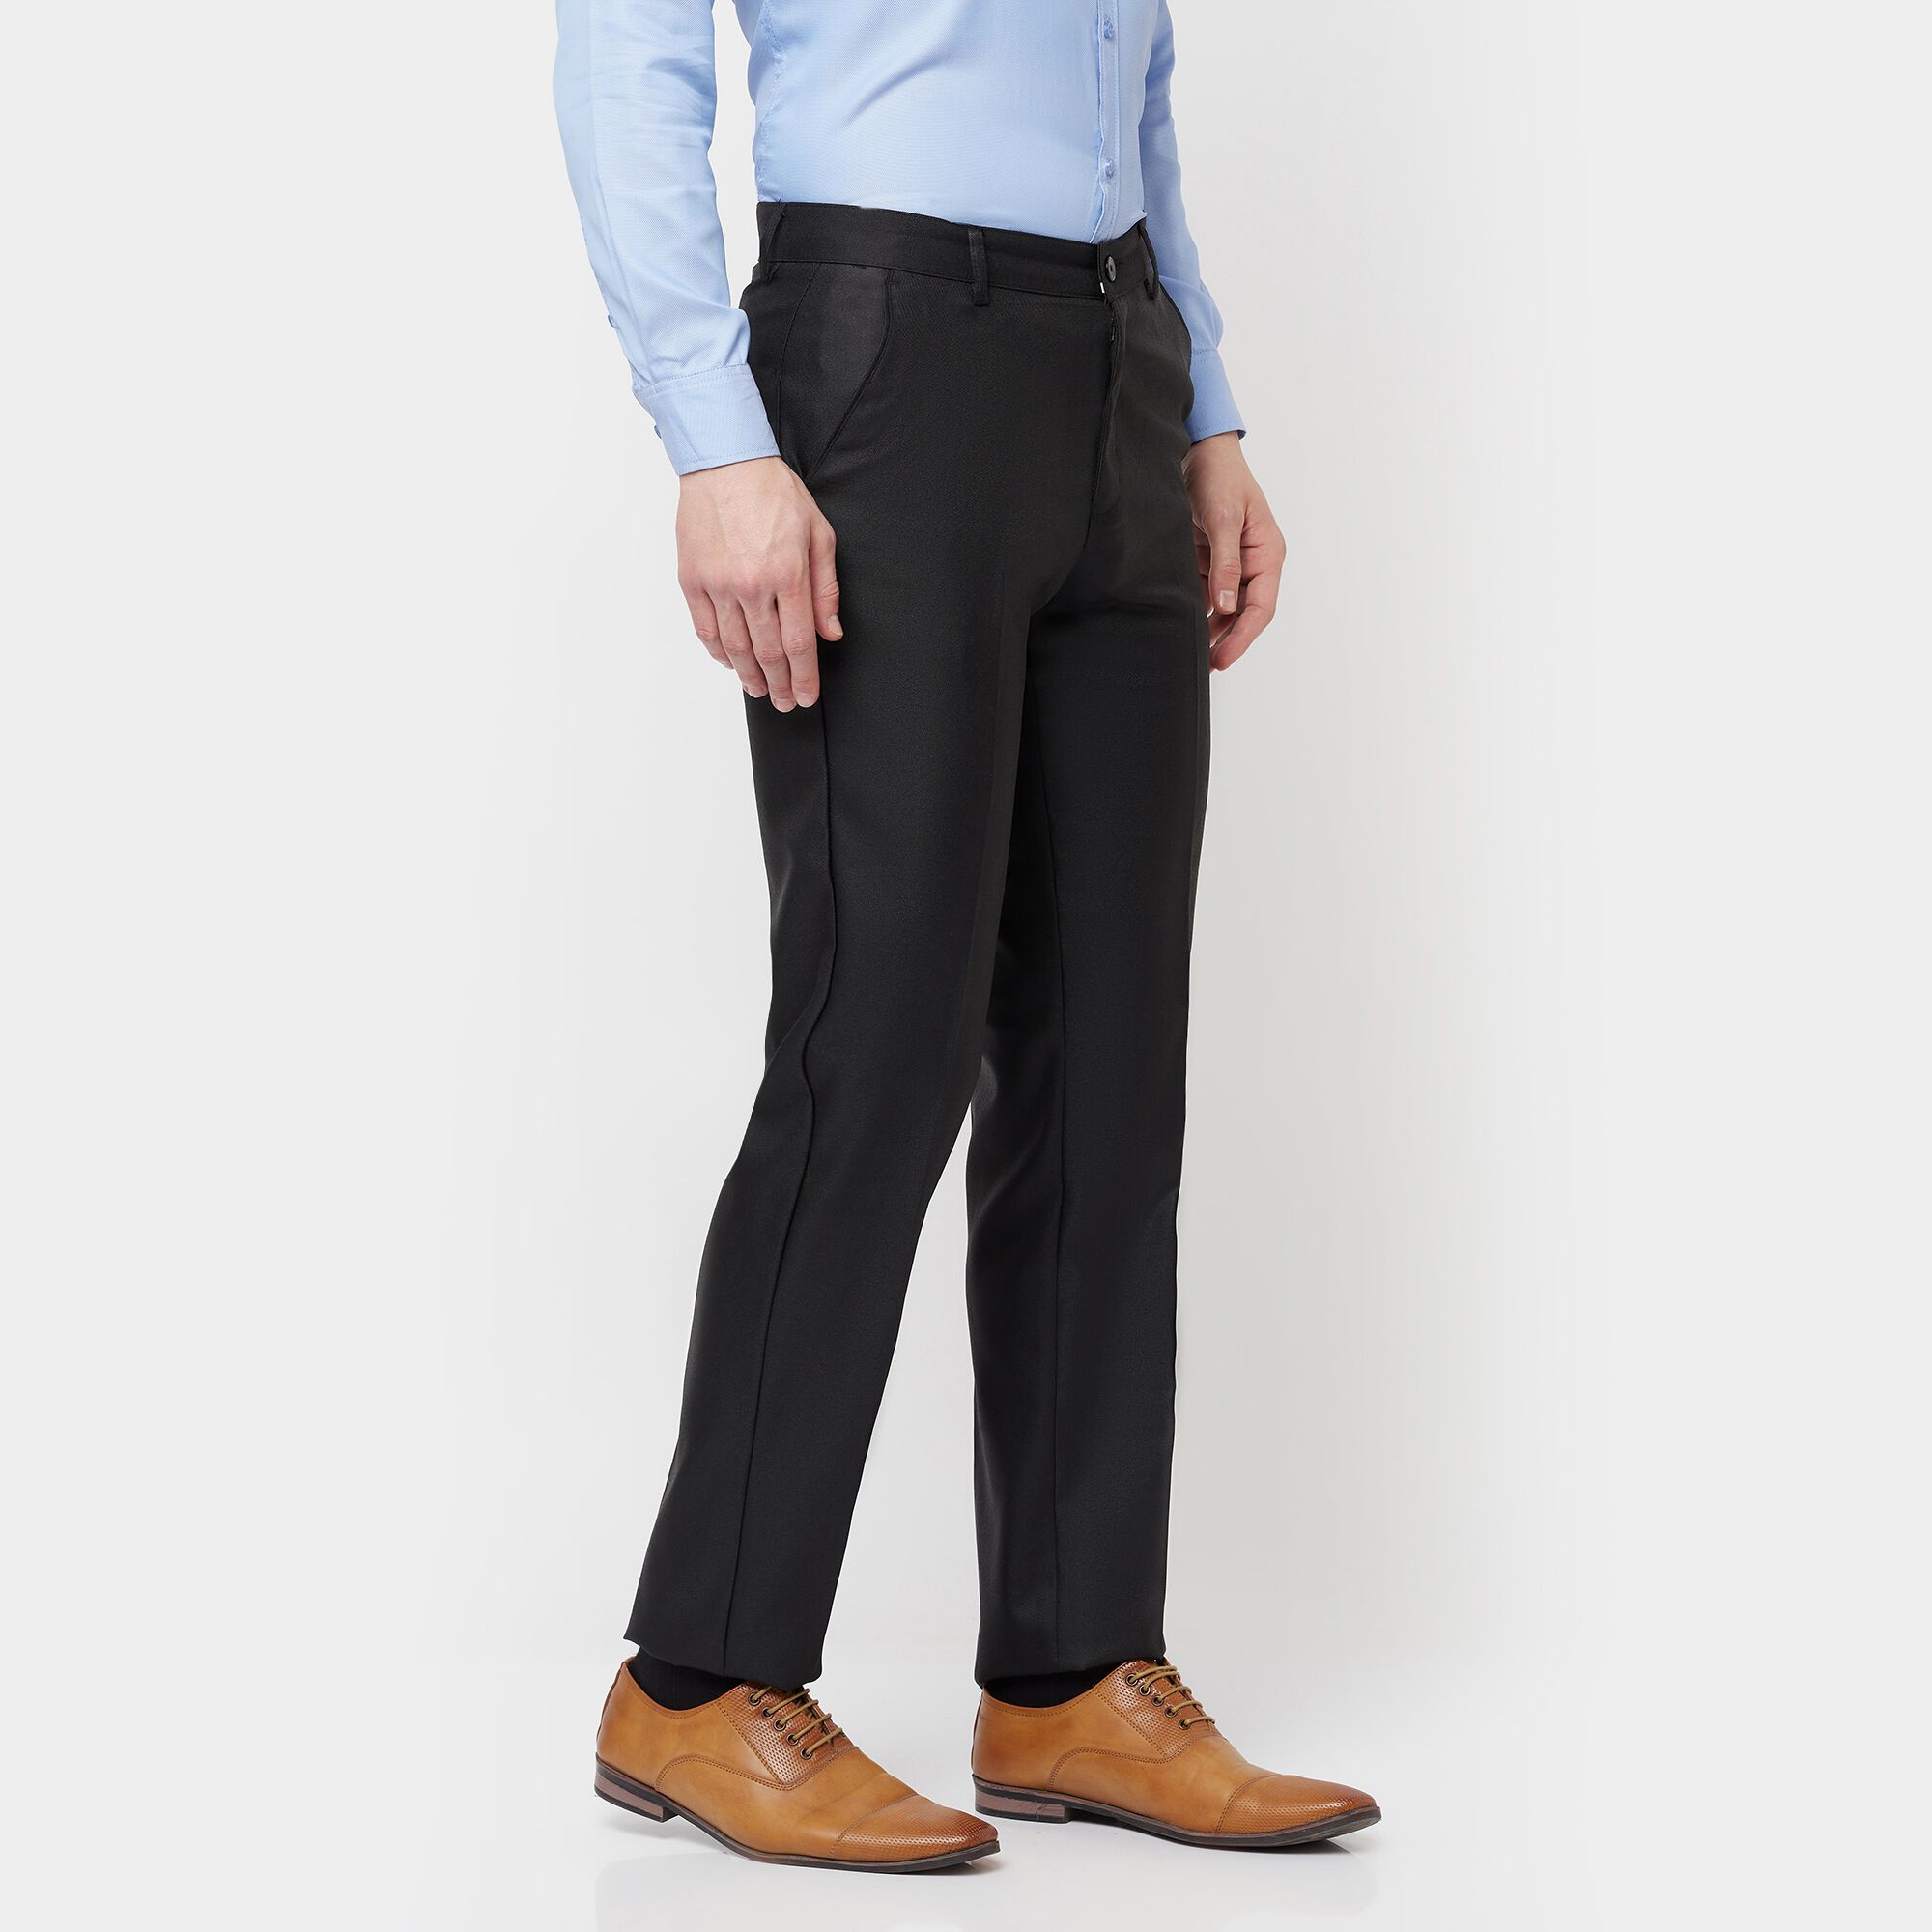 Buy Men Cream Regular Fit Check Flat Front Formal Trousers Online - 724071  | Louis Philippe